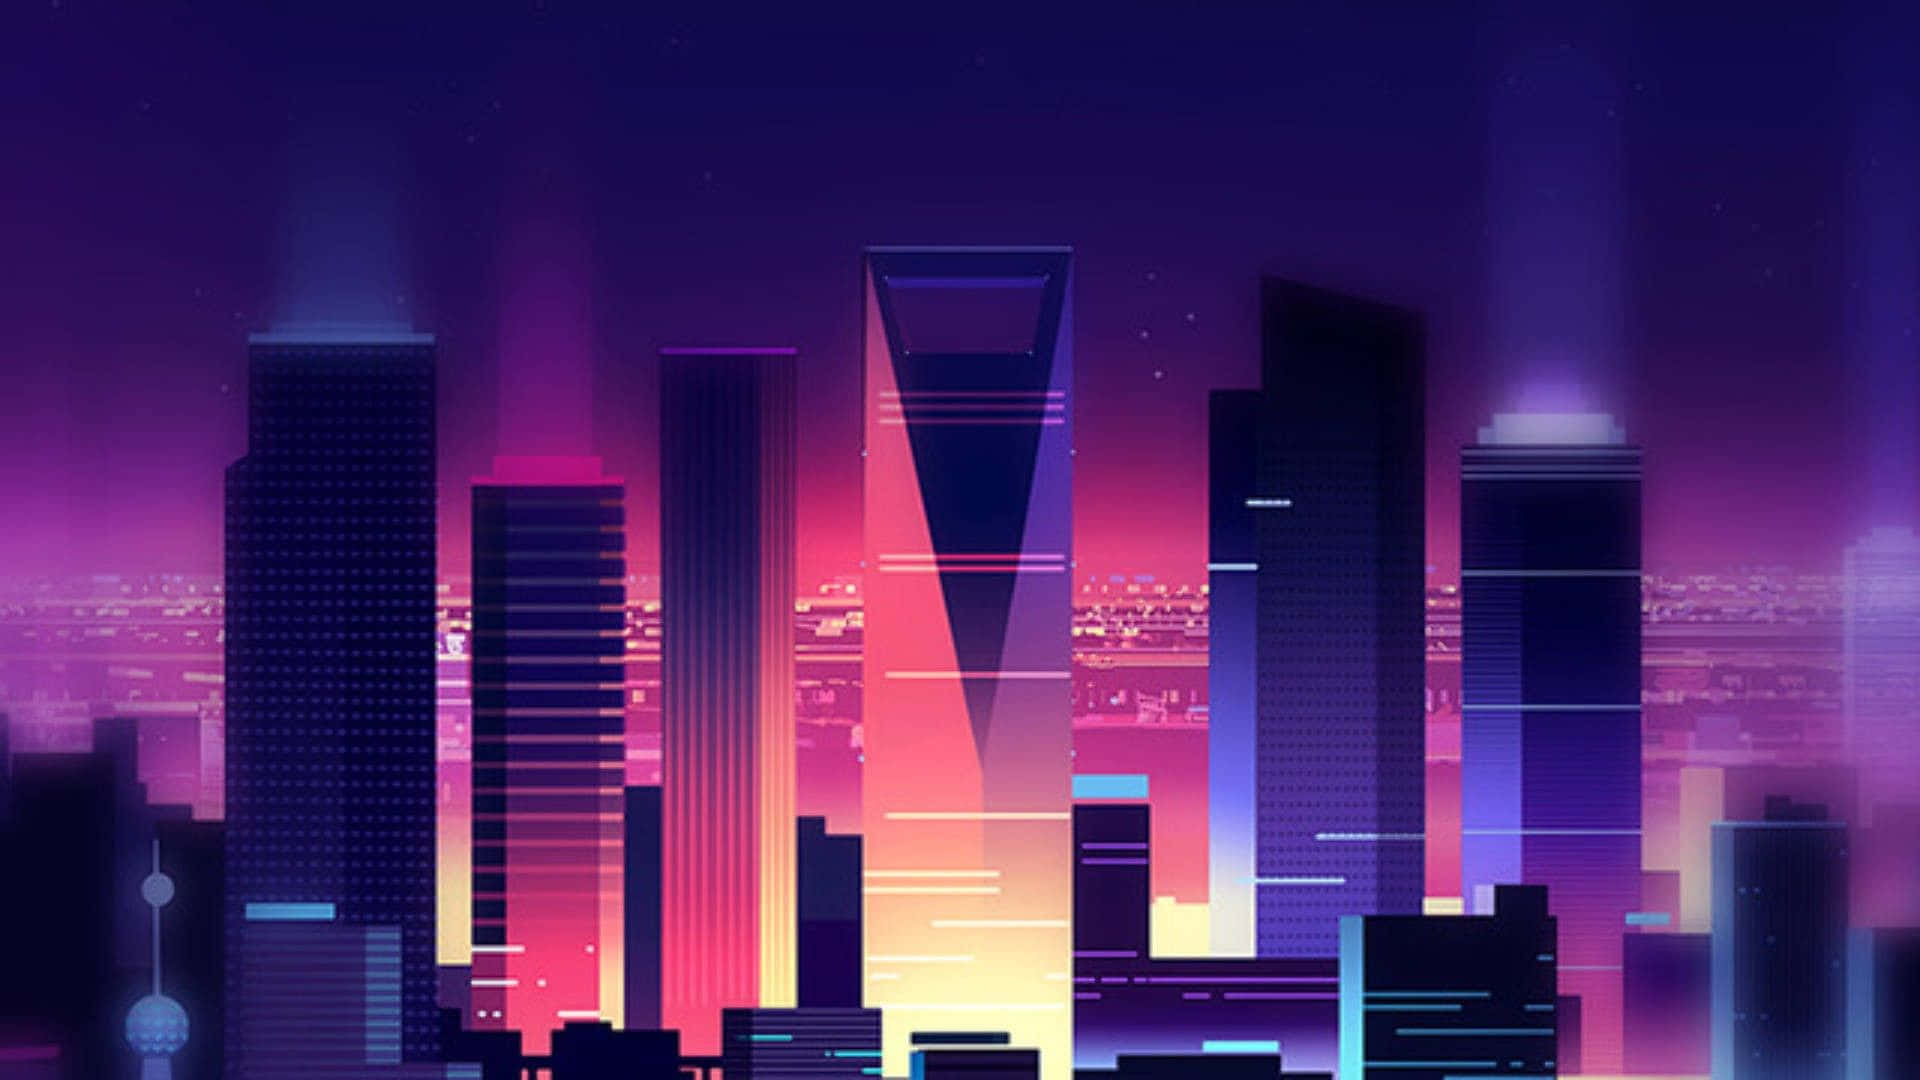 Aesthetic Computer glowing with a vibrant purple neon light. Wallpaper